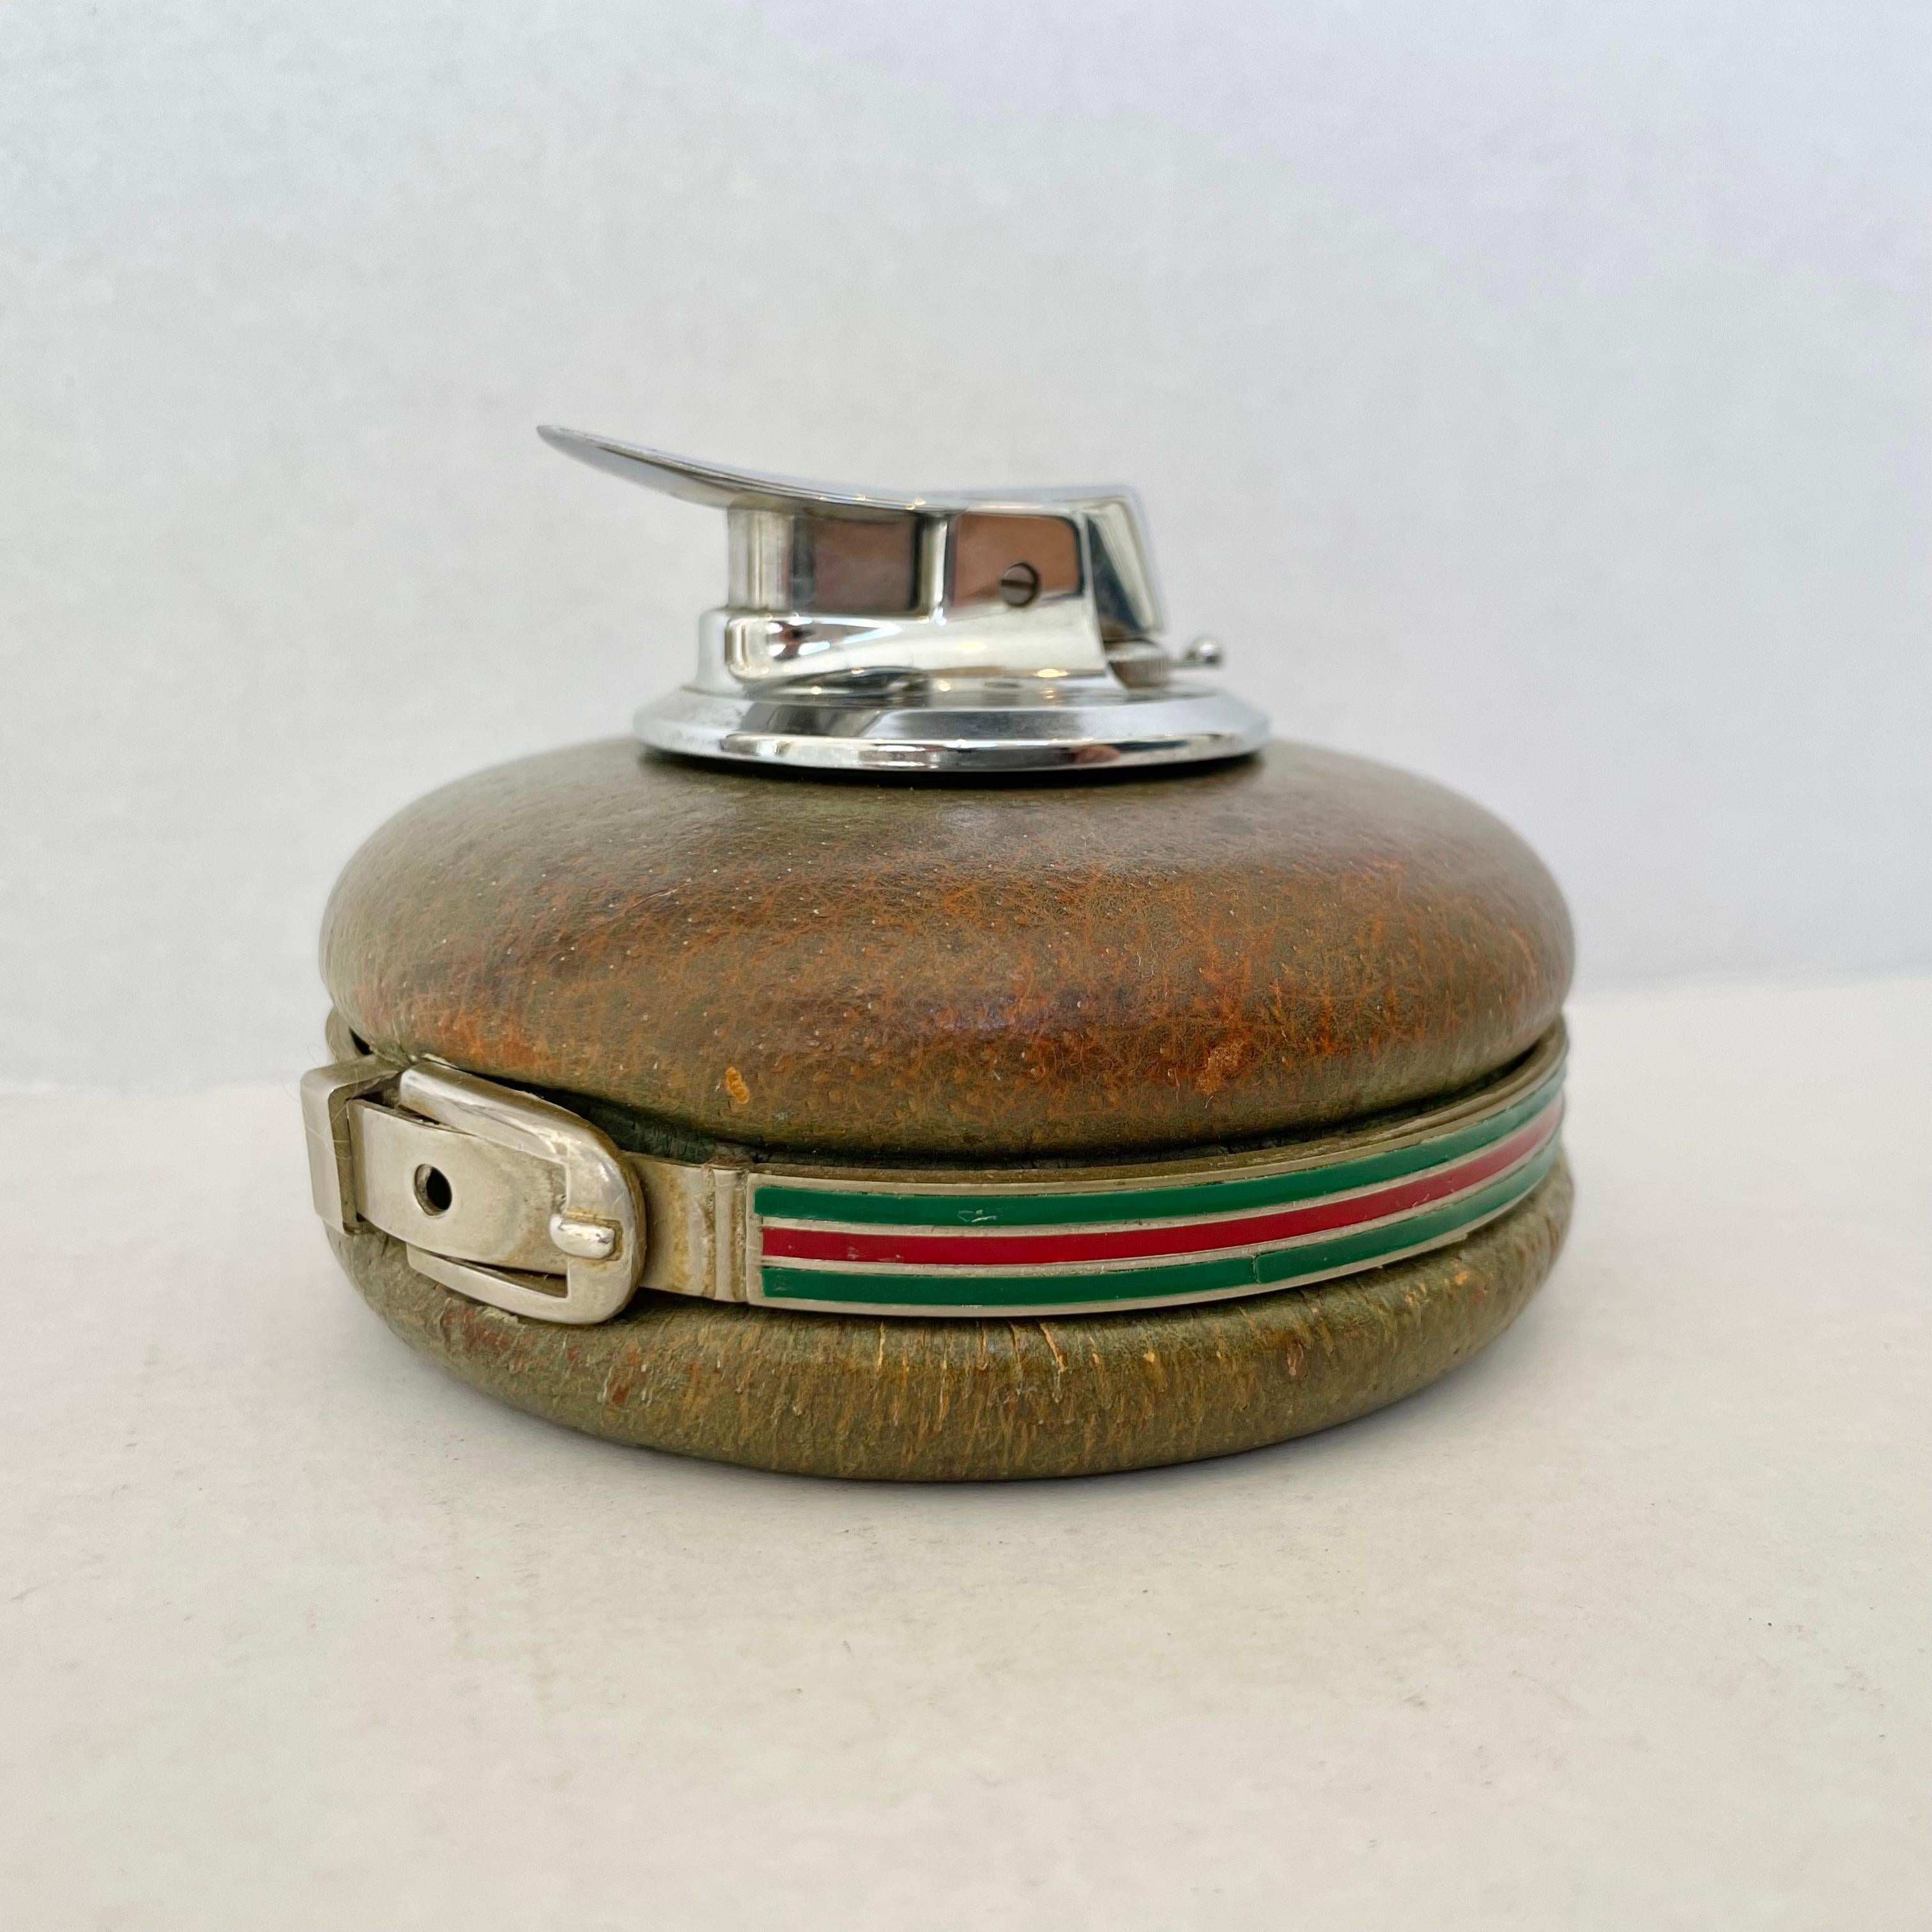 Elegant and rare Gucci table lighter with amazing details. Completely wrapped in leather which, at it's time of manufacture in the 50s, was green has now faded giving it a beautiful patina. The original leather color can still be seen on the base